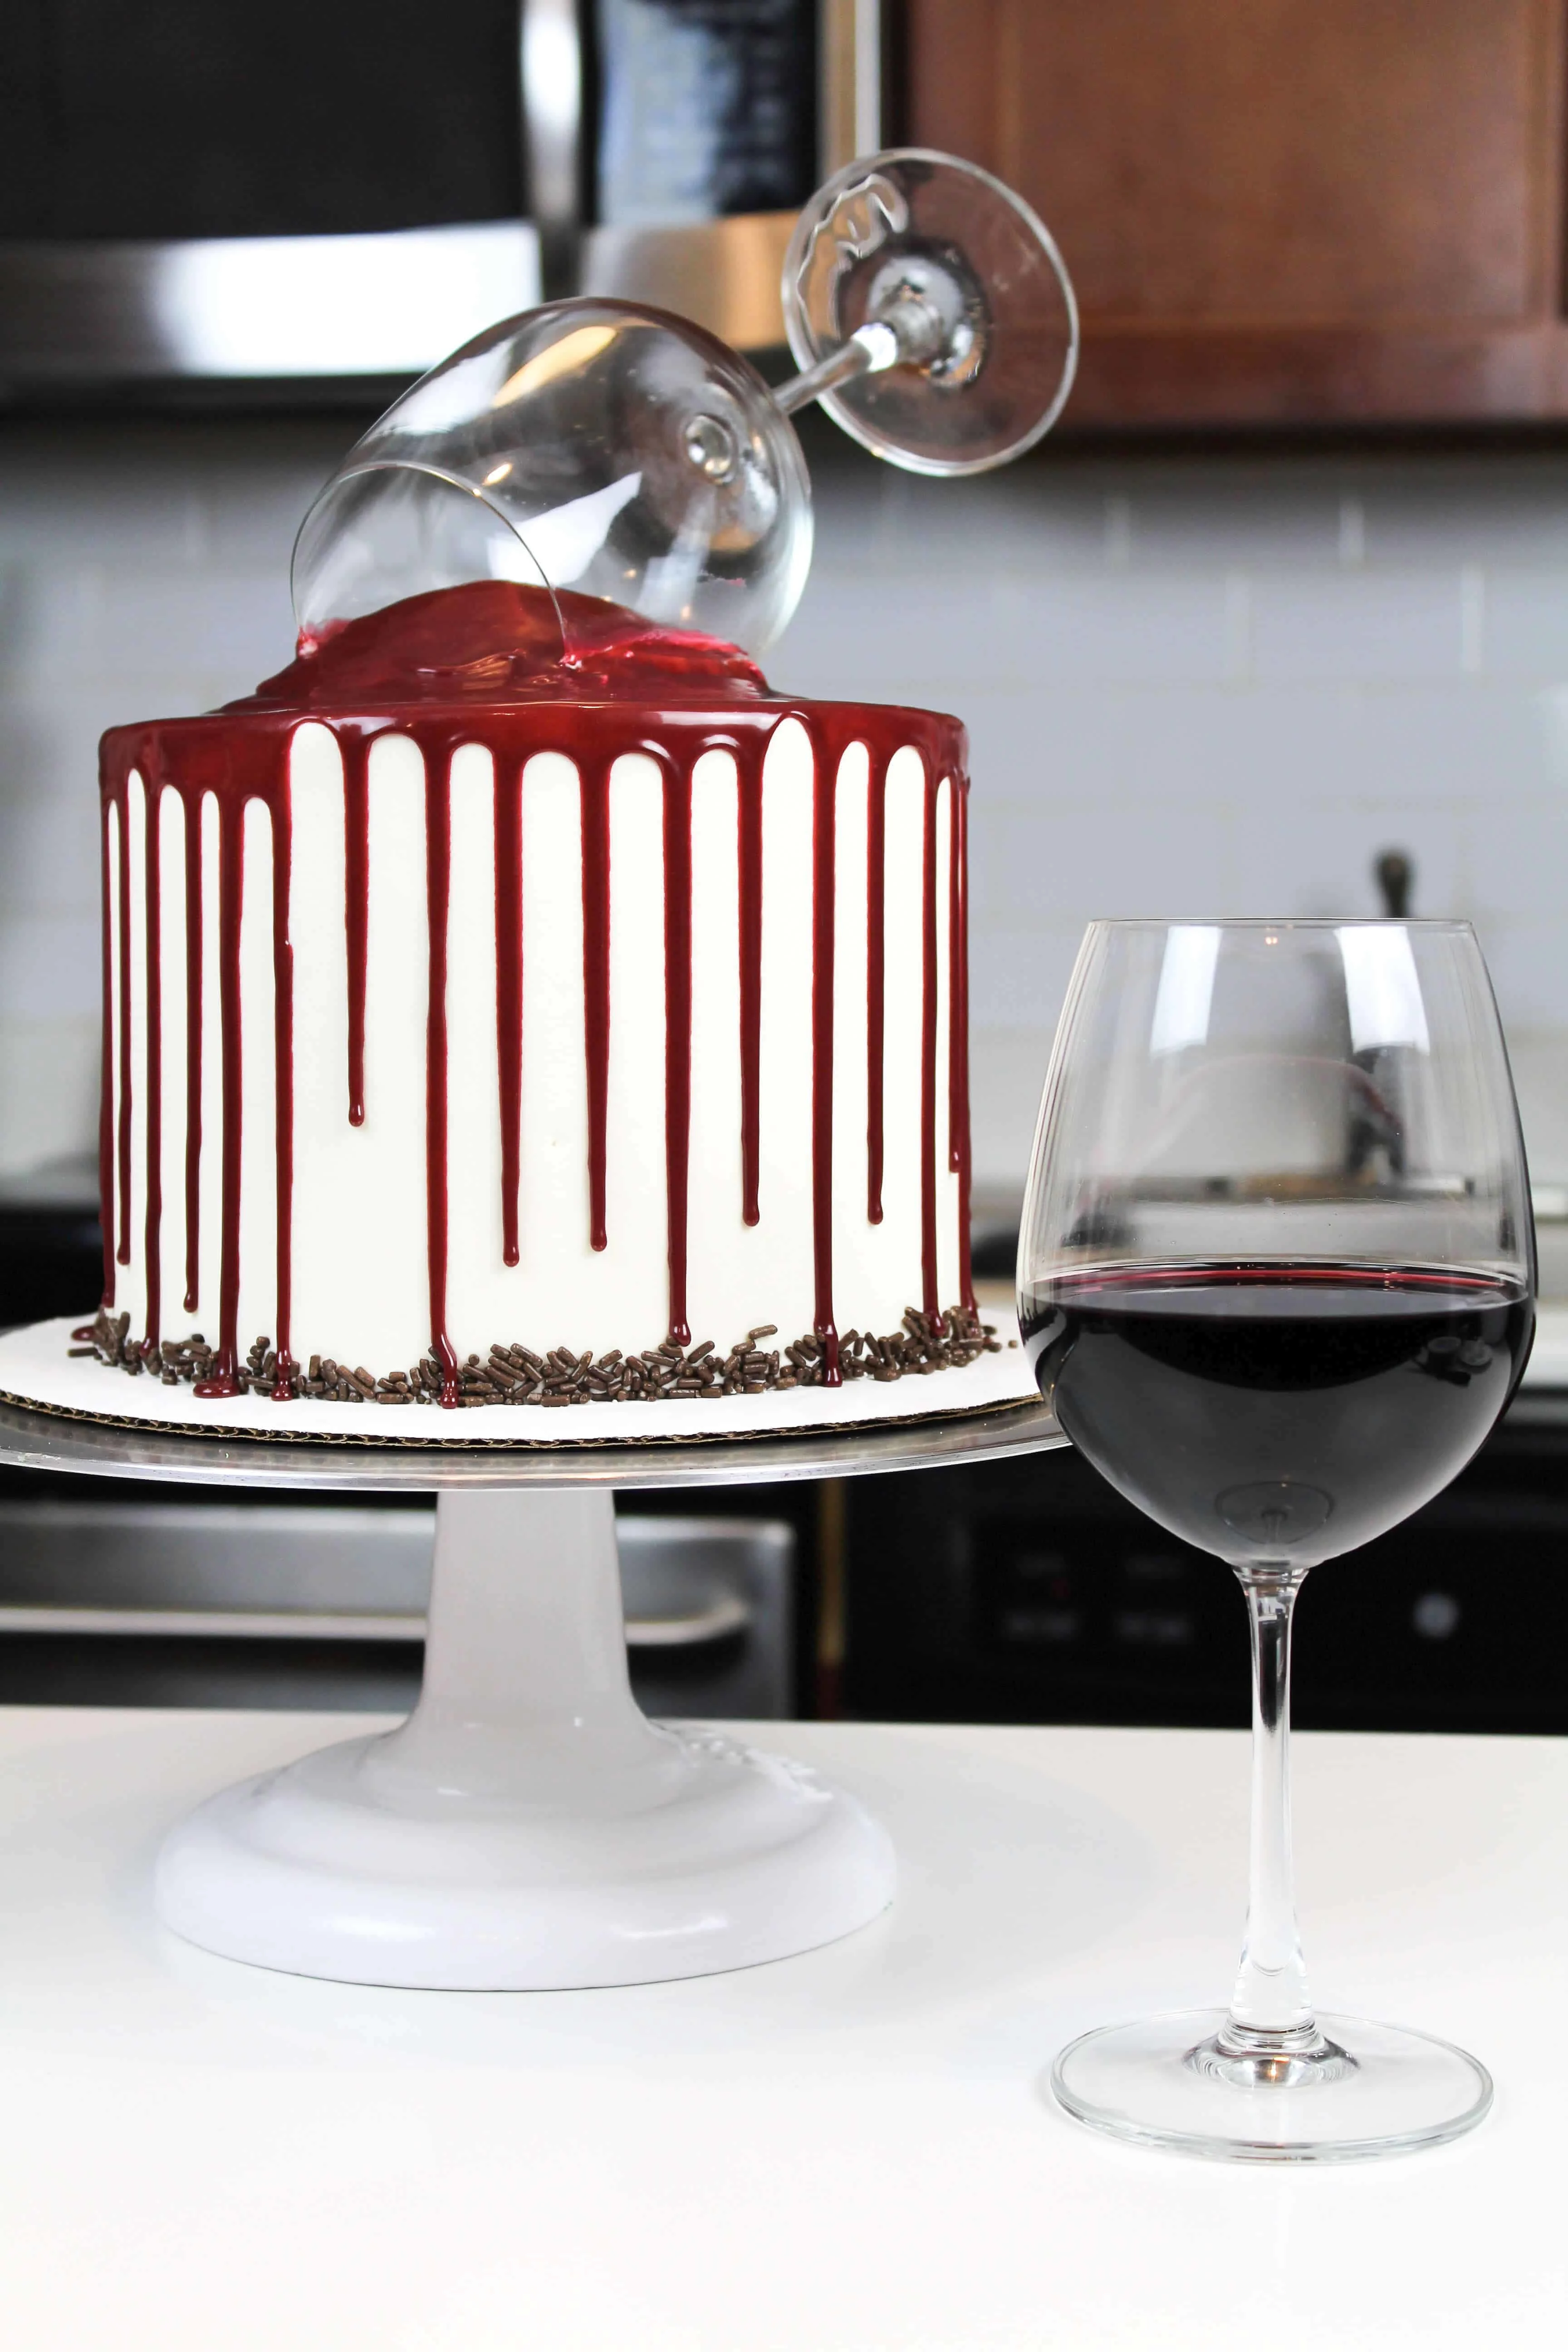 Image of a red wine chocolate cake next to a glass of red wine